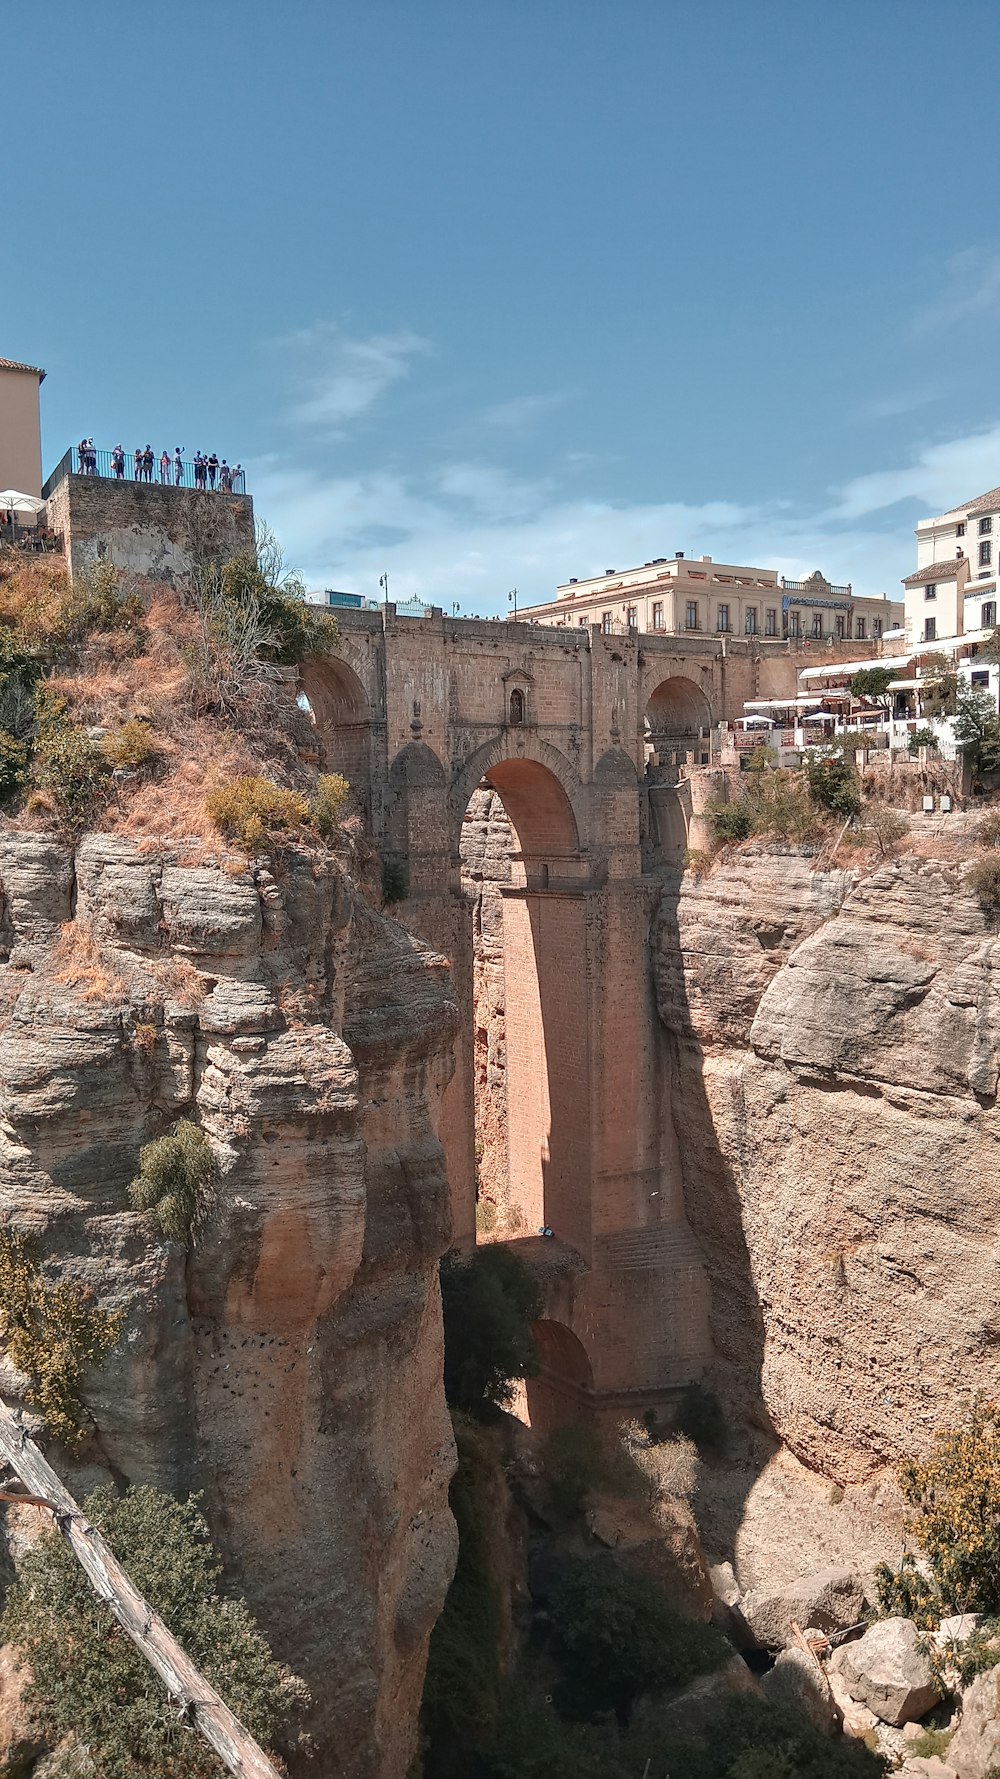 a bridge over a canyon with people standing on top of it